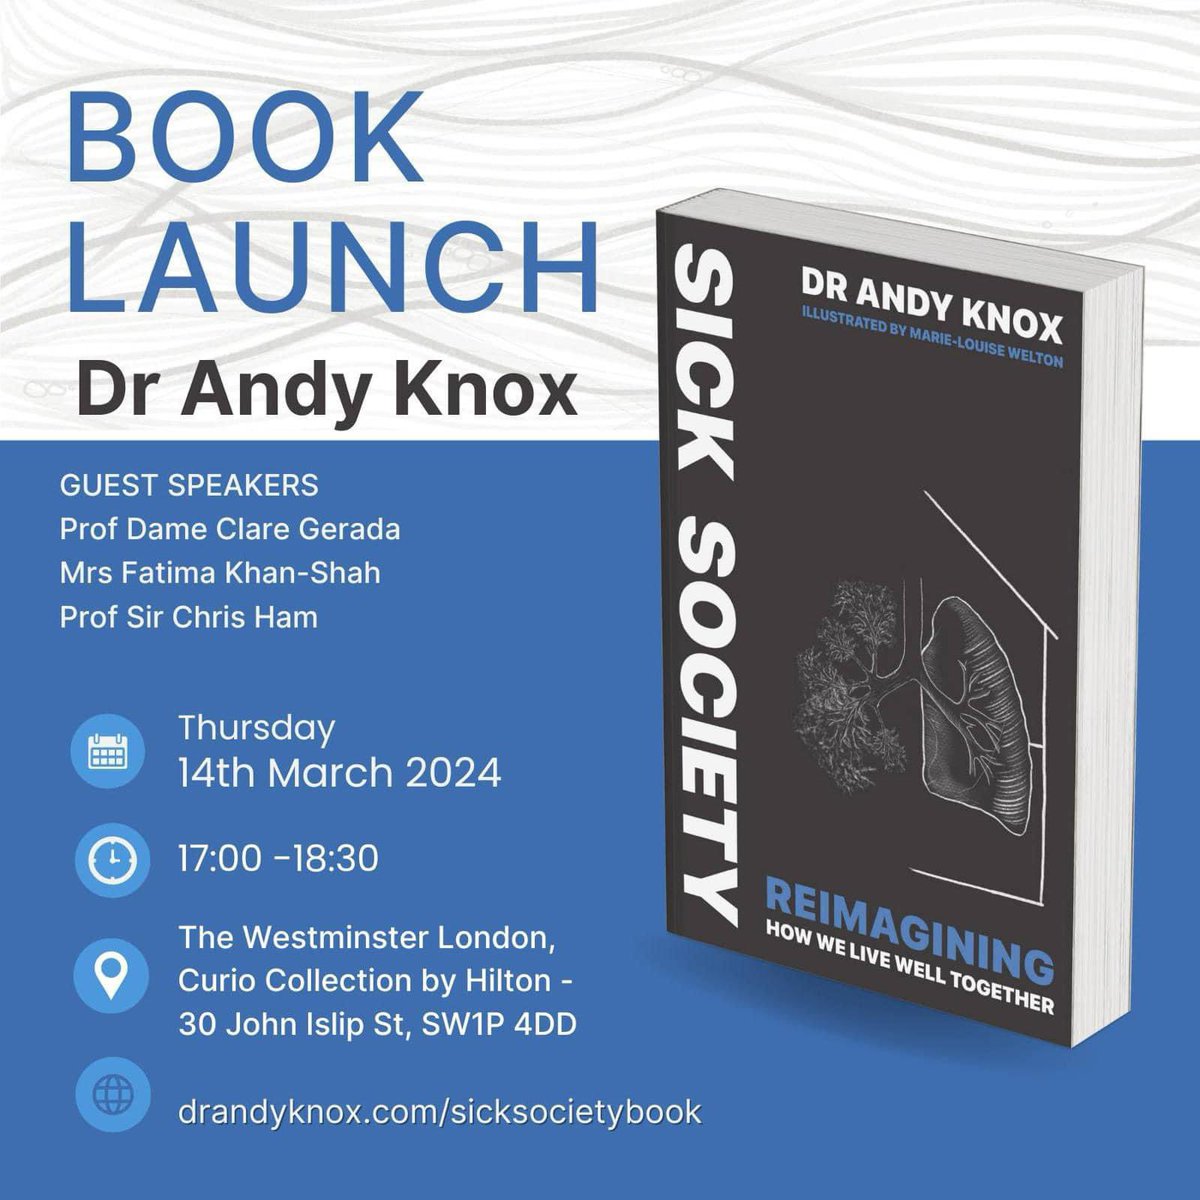 If you’re in or around London and would like to come to the launch of @drandyknox book #sicksociety on Thursday 14th March, there are a few tickets left . Here is the link to book your free ticket! buytickets.at/sicksocietyboo…